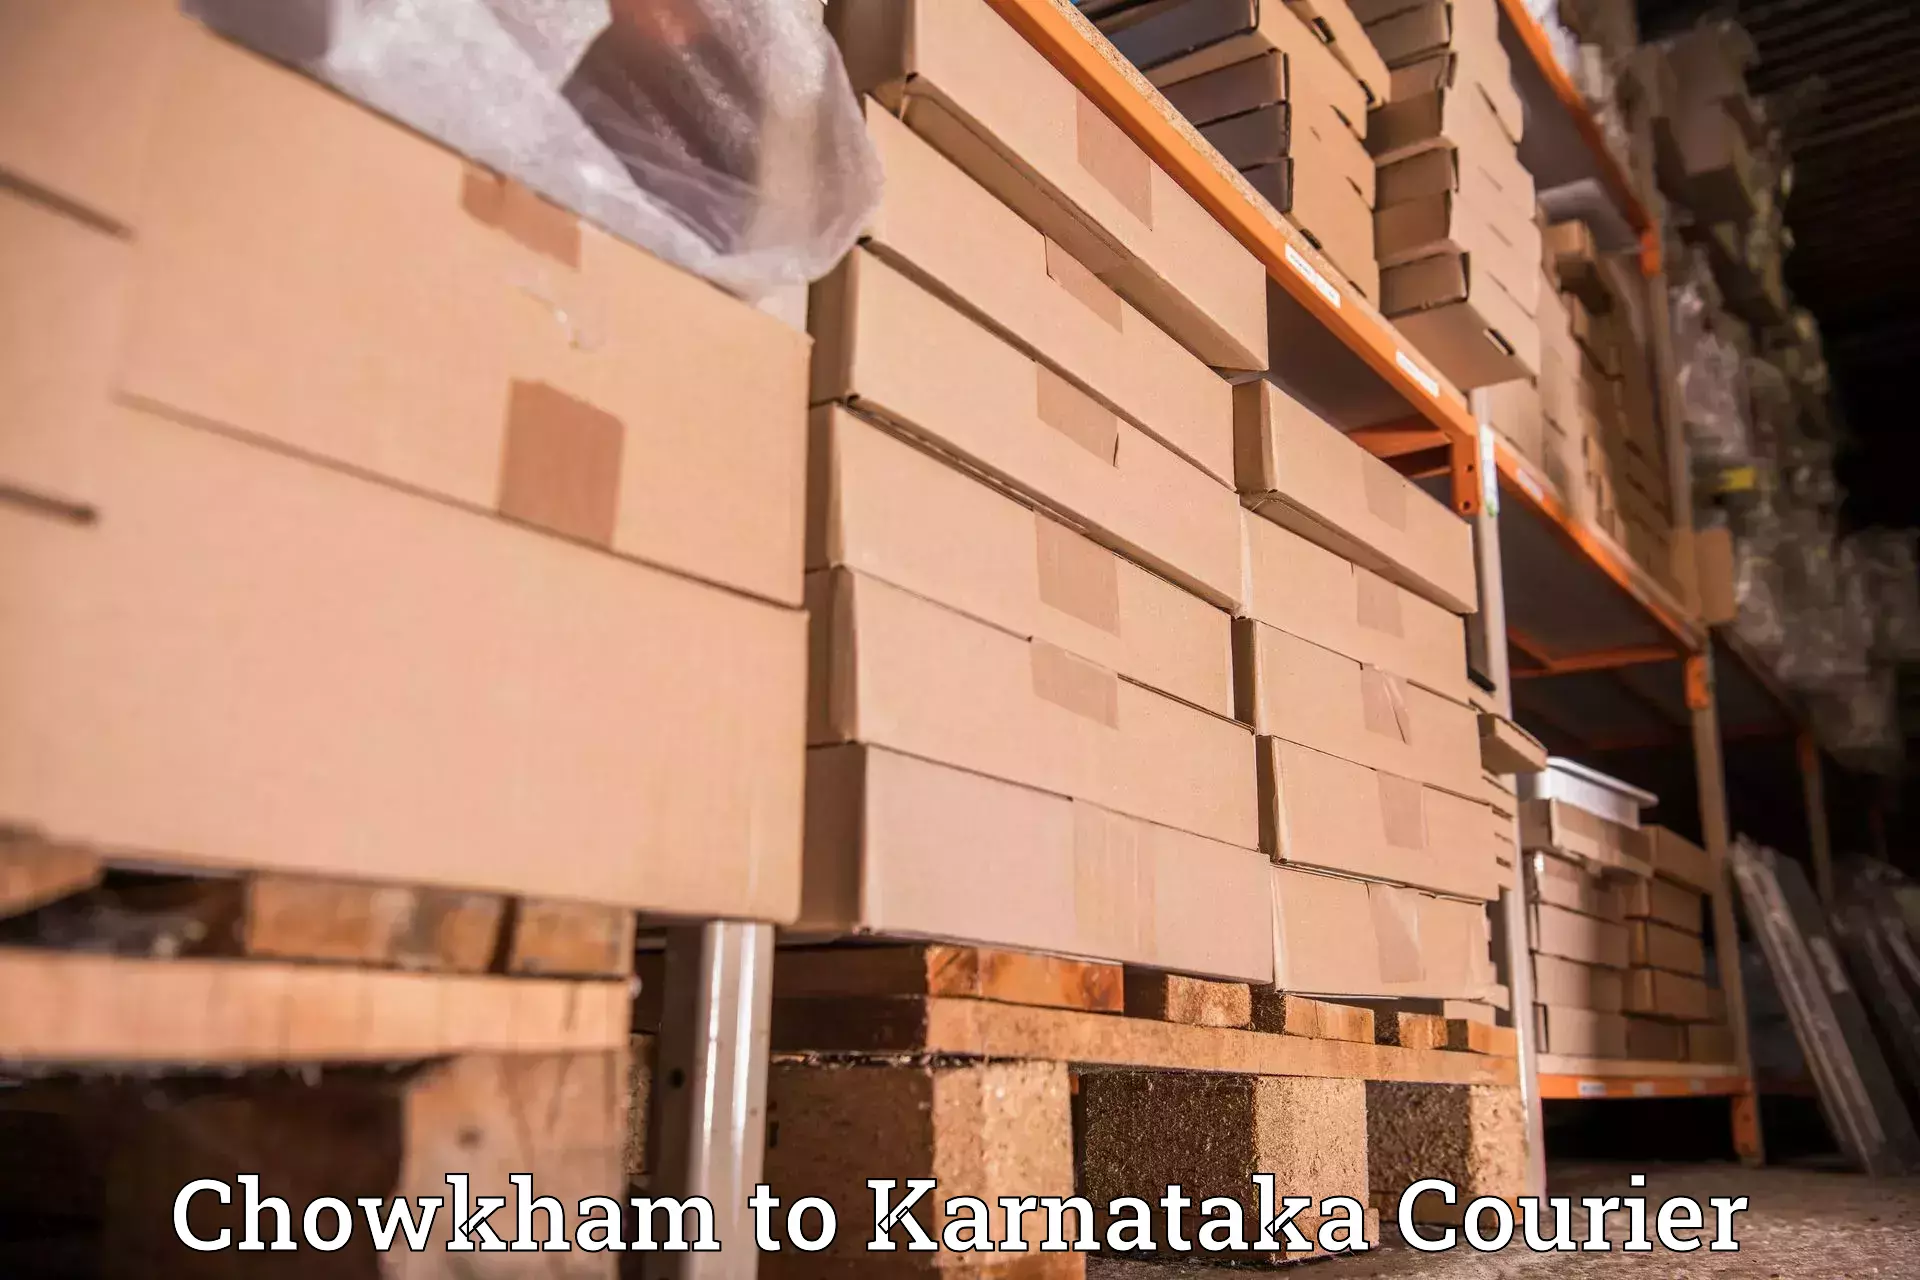 On-call courier service Chowkham to Chikkamagaluru